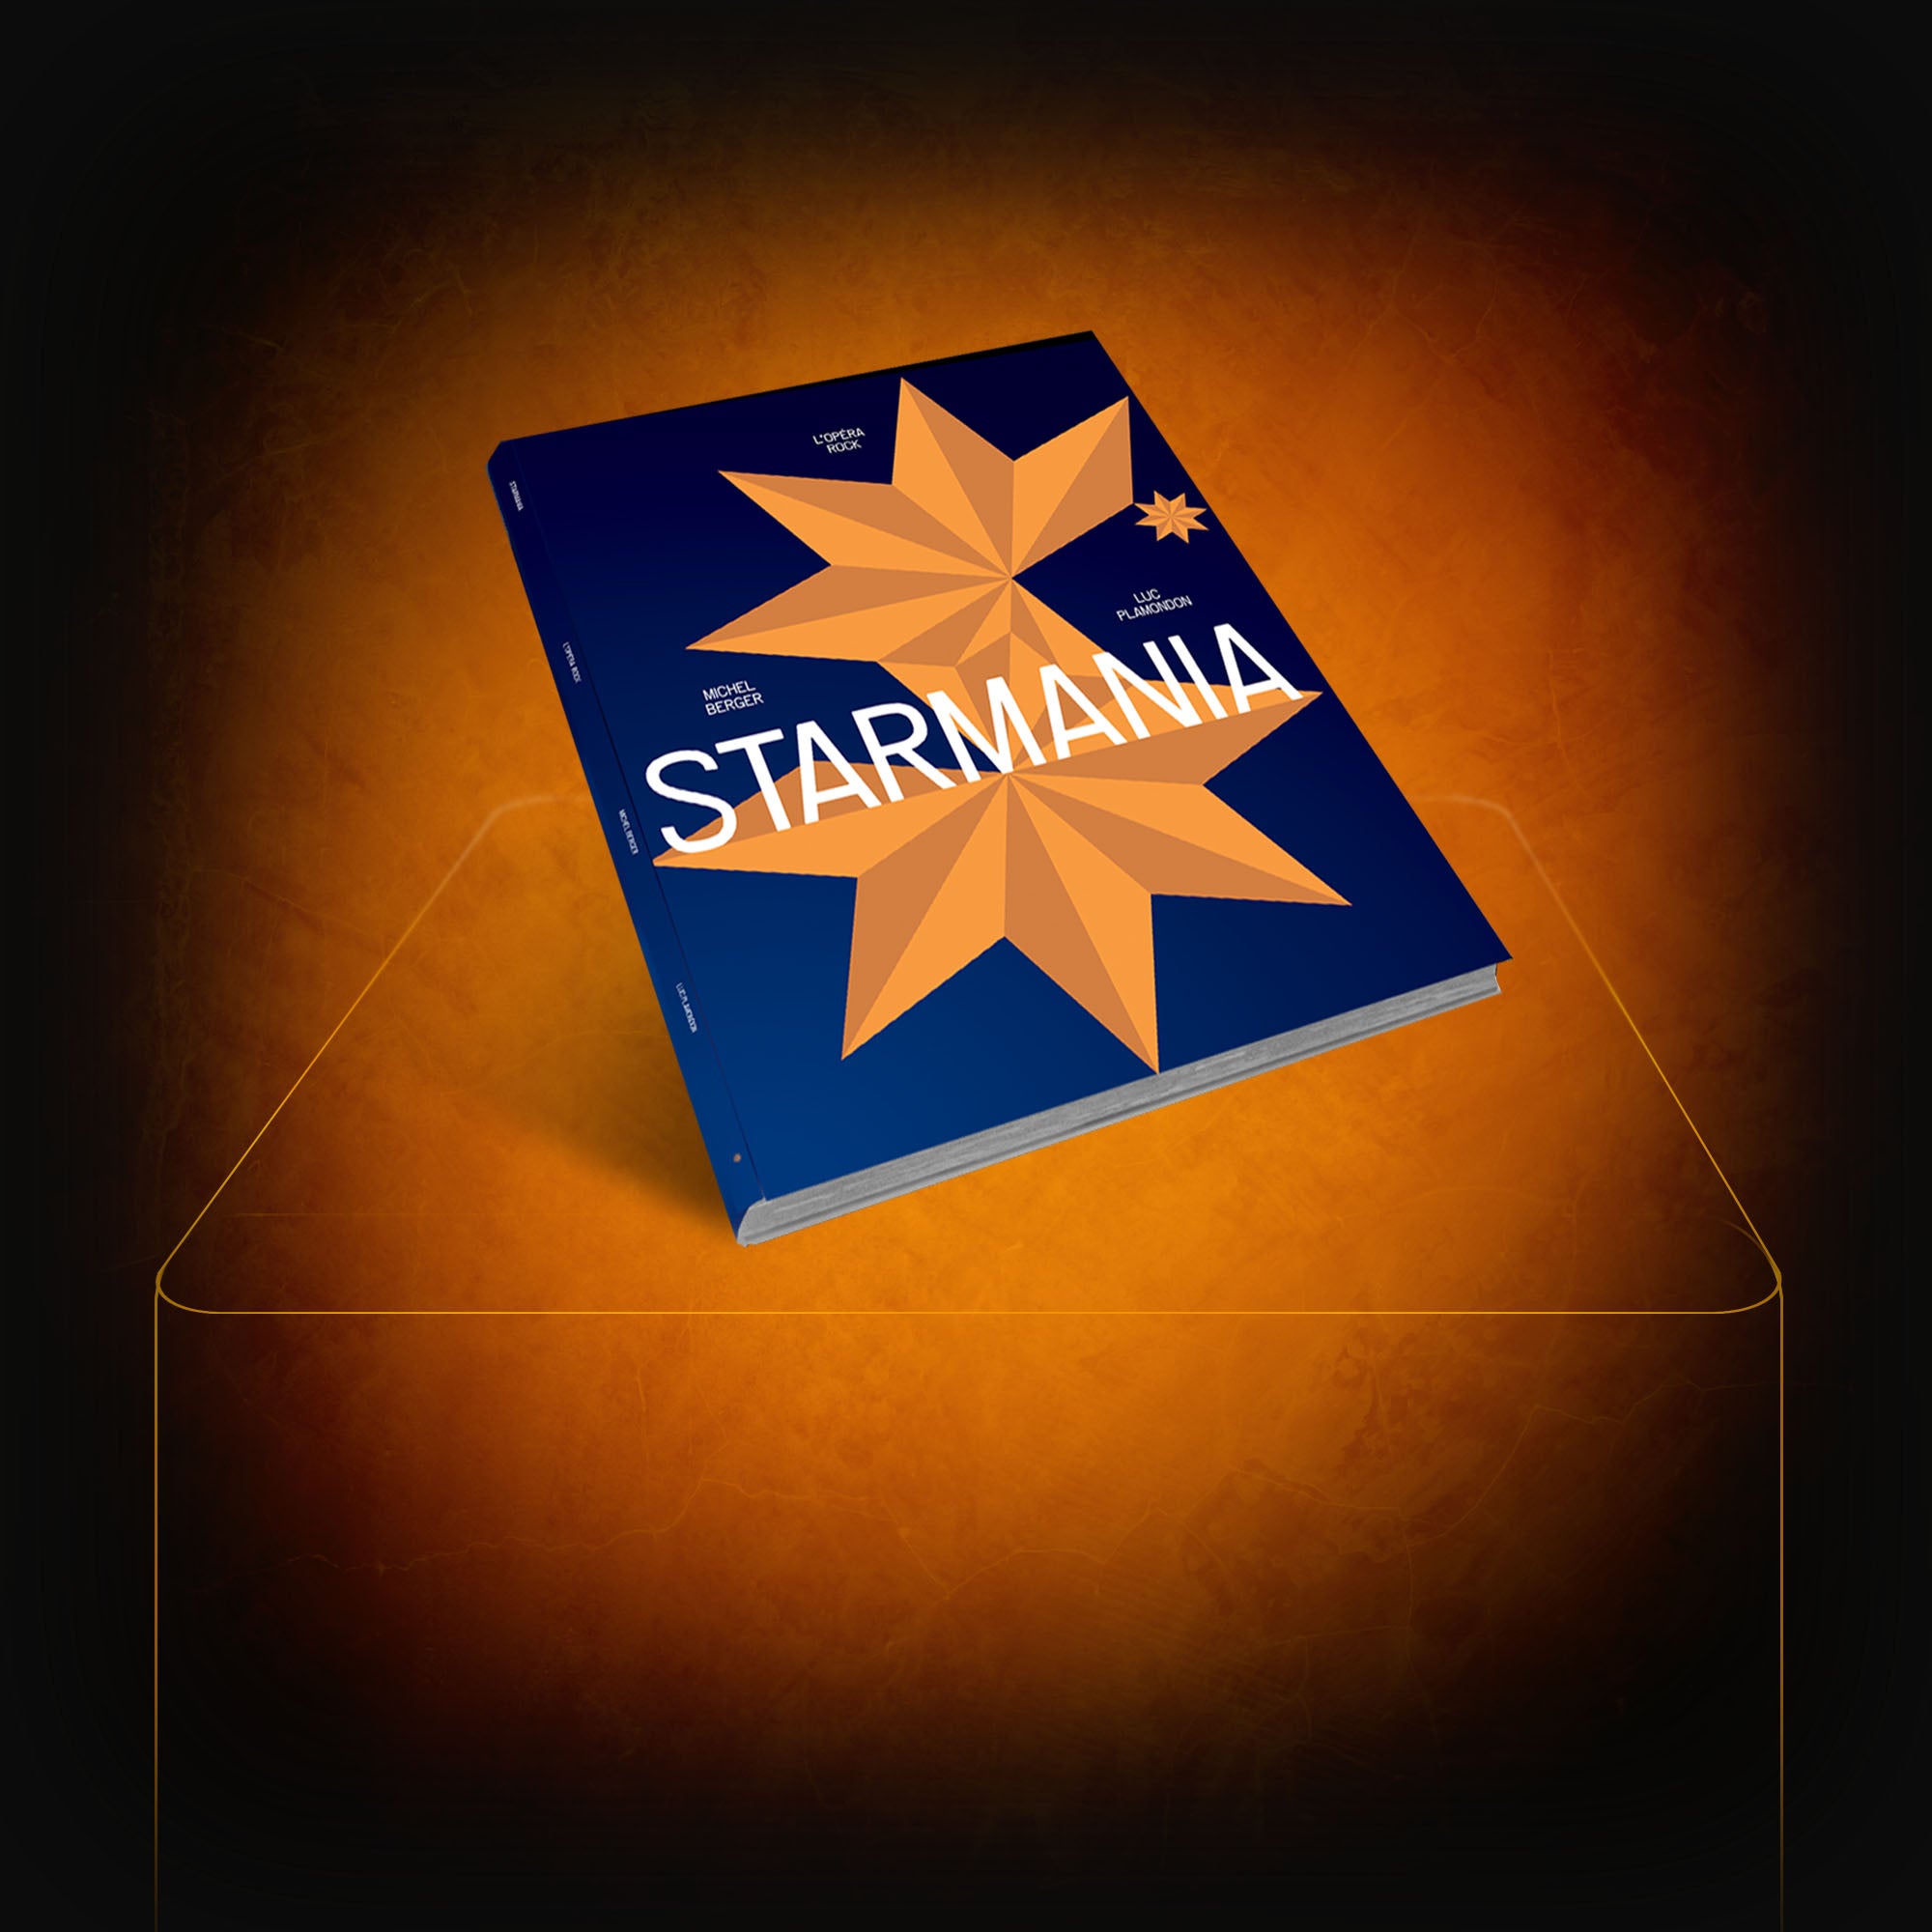 Programme spectacle - Starmania